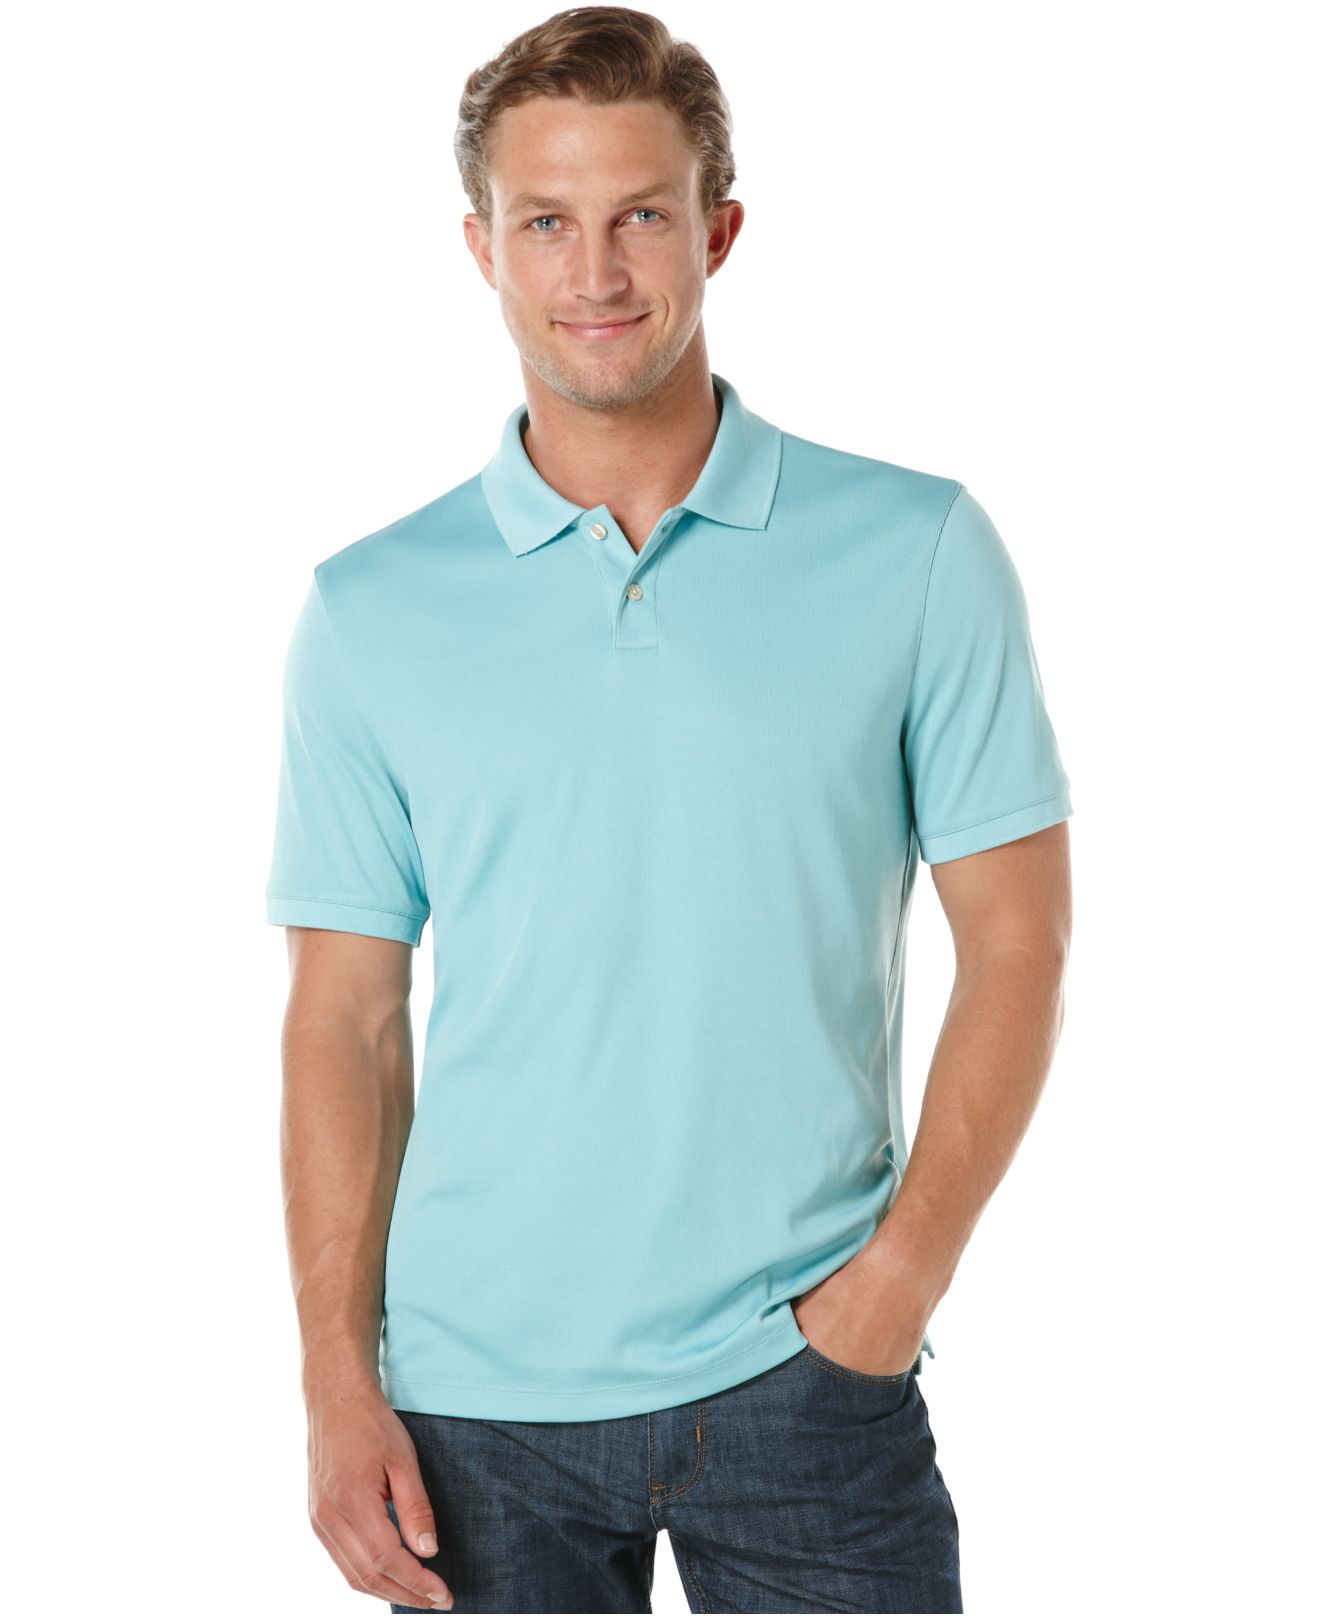 Perry Ellis Two-button Short-sleeve Polo Shirt in Blue for Men - Lyst